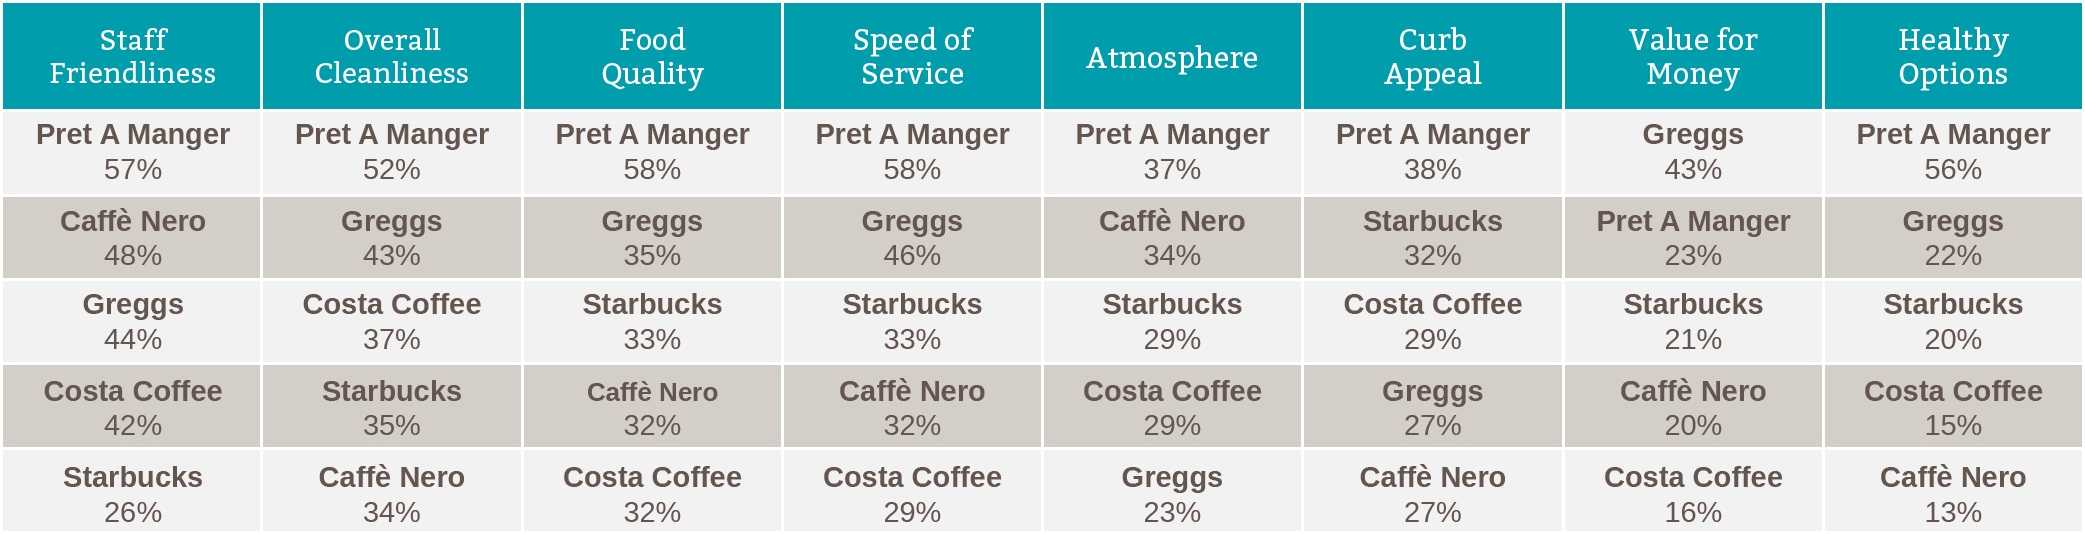 Value for Money Chart QSR UK (Coffee)